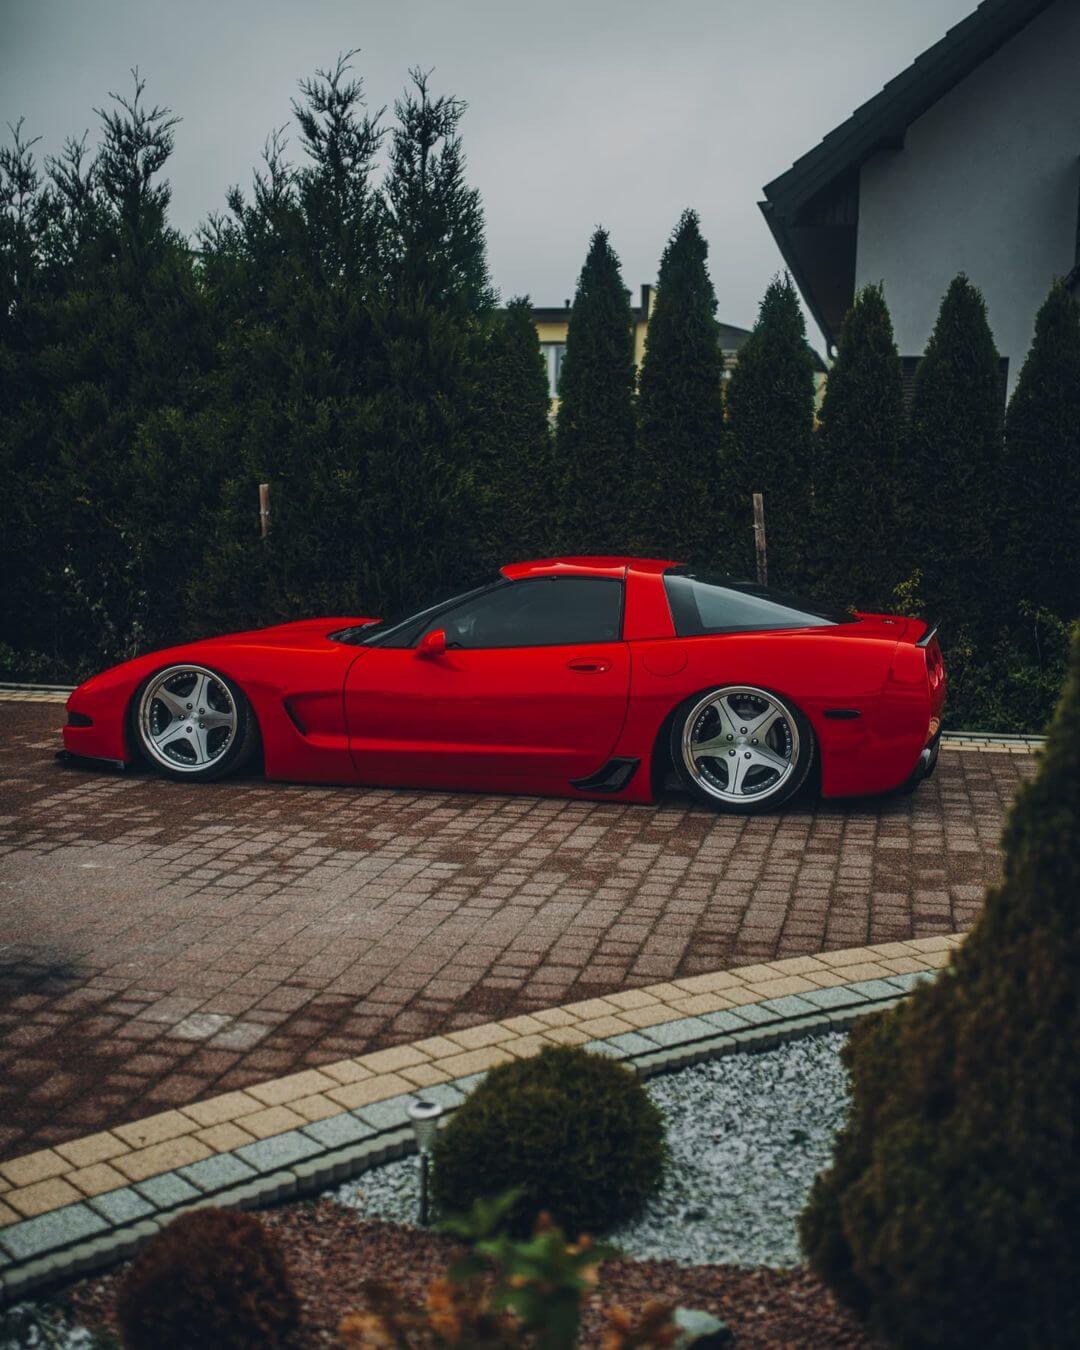 Stanced Chevy Corvette C5 red bagged